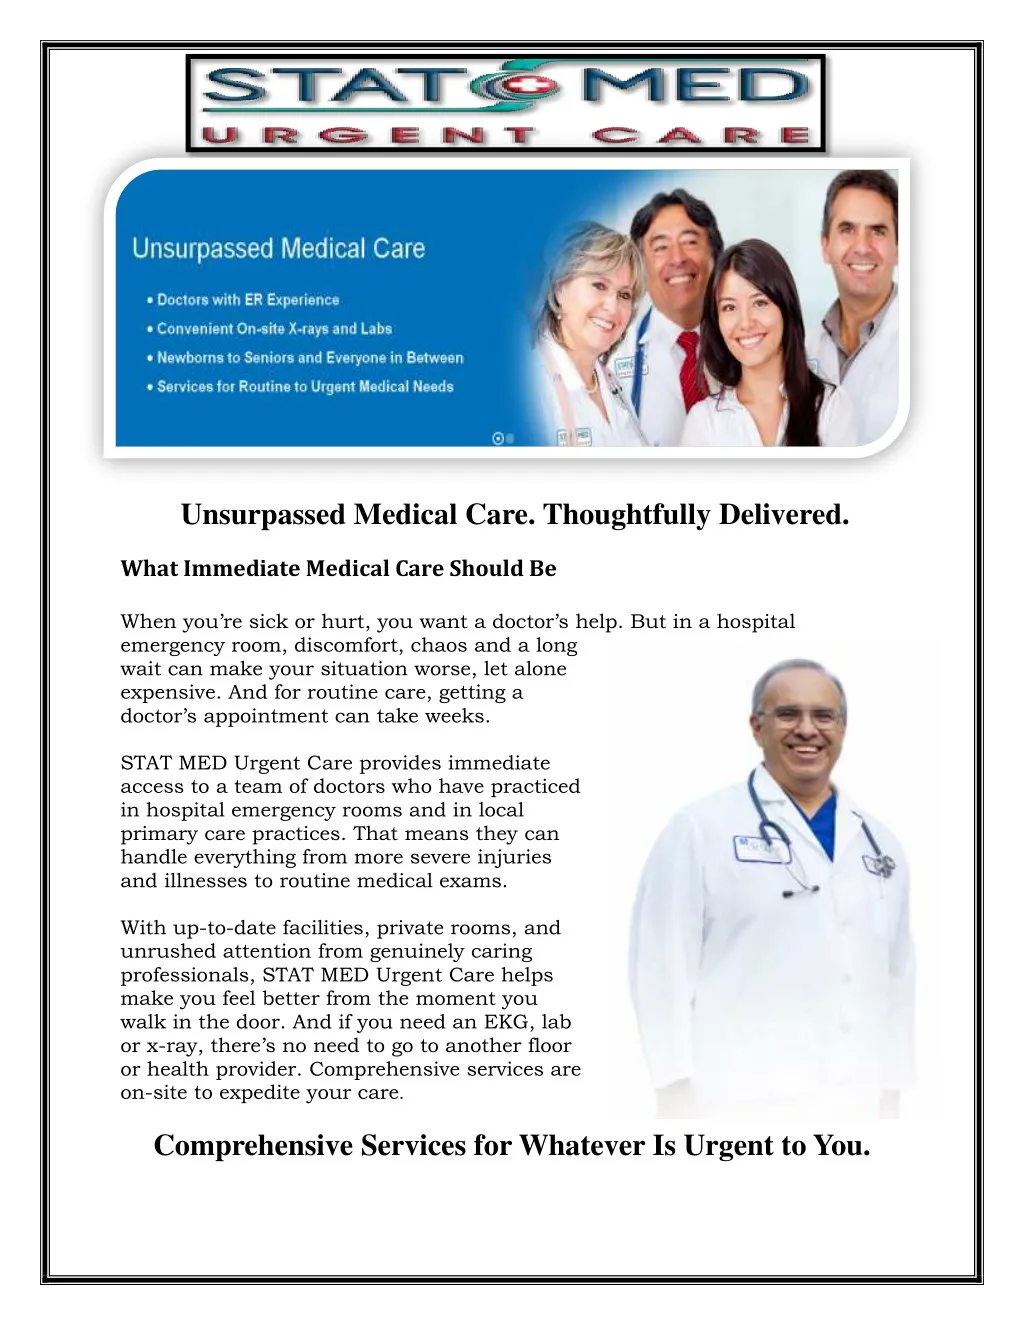 unsurpassed medical care thoughtfully delivered